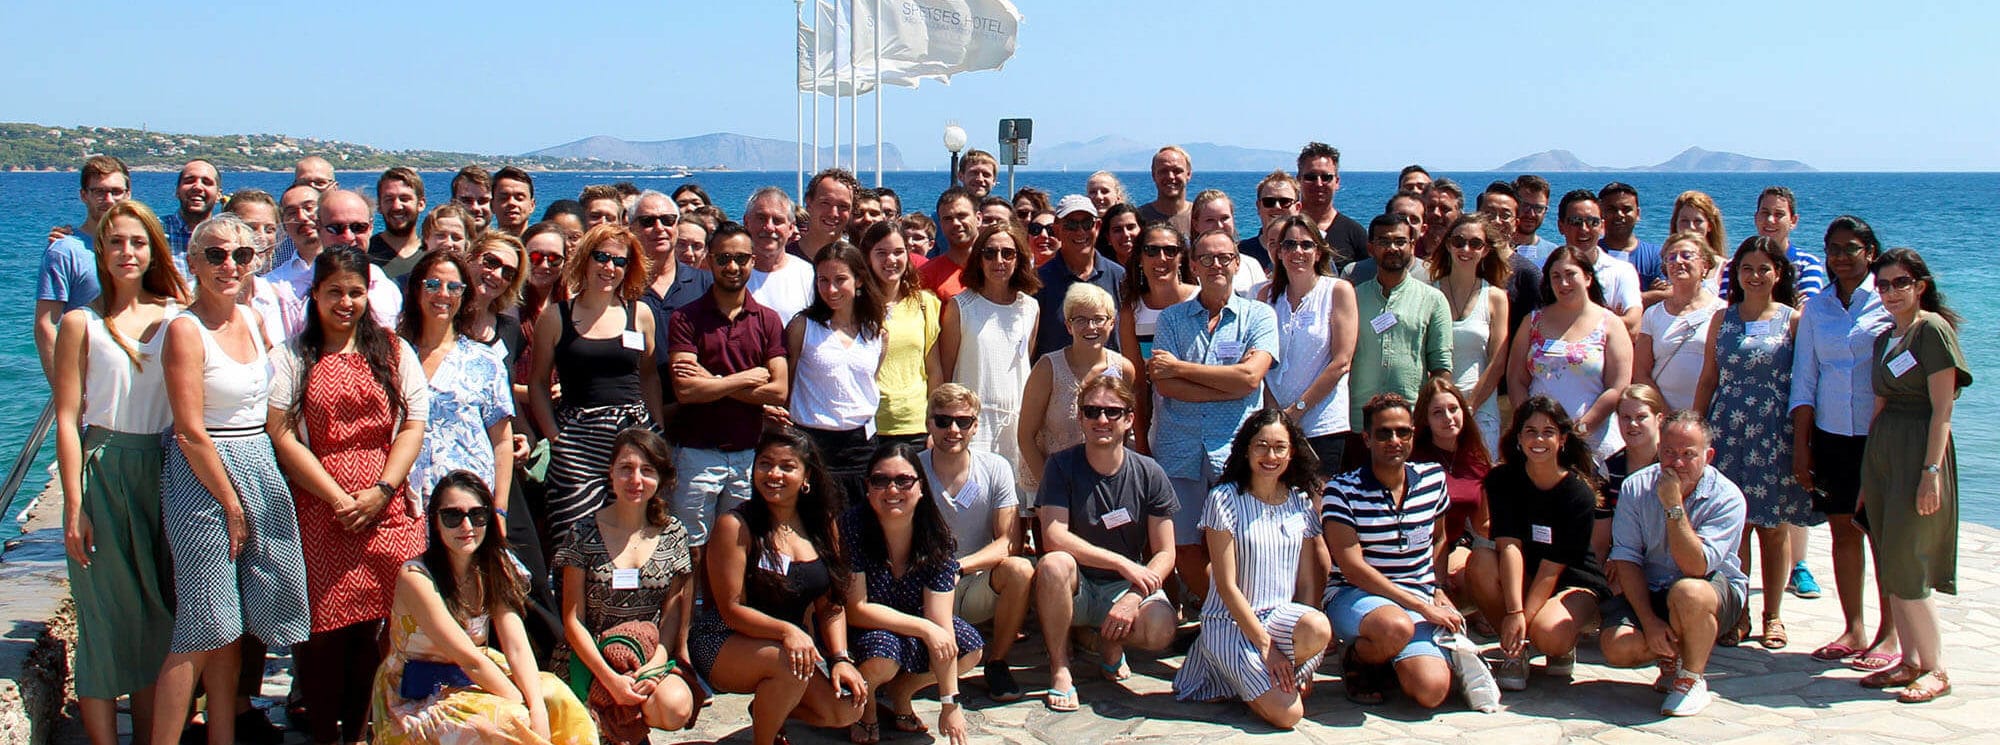 Participants at a FEBS Advanced Lecture Course on 'Epigenomics, nuclear receptors and disease', Spetses Island, Greece, August 2019